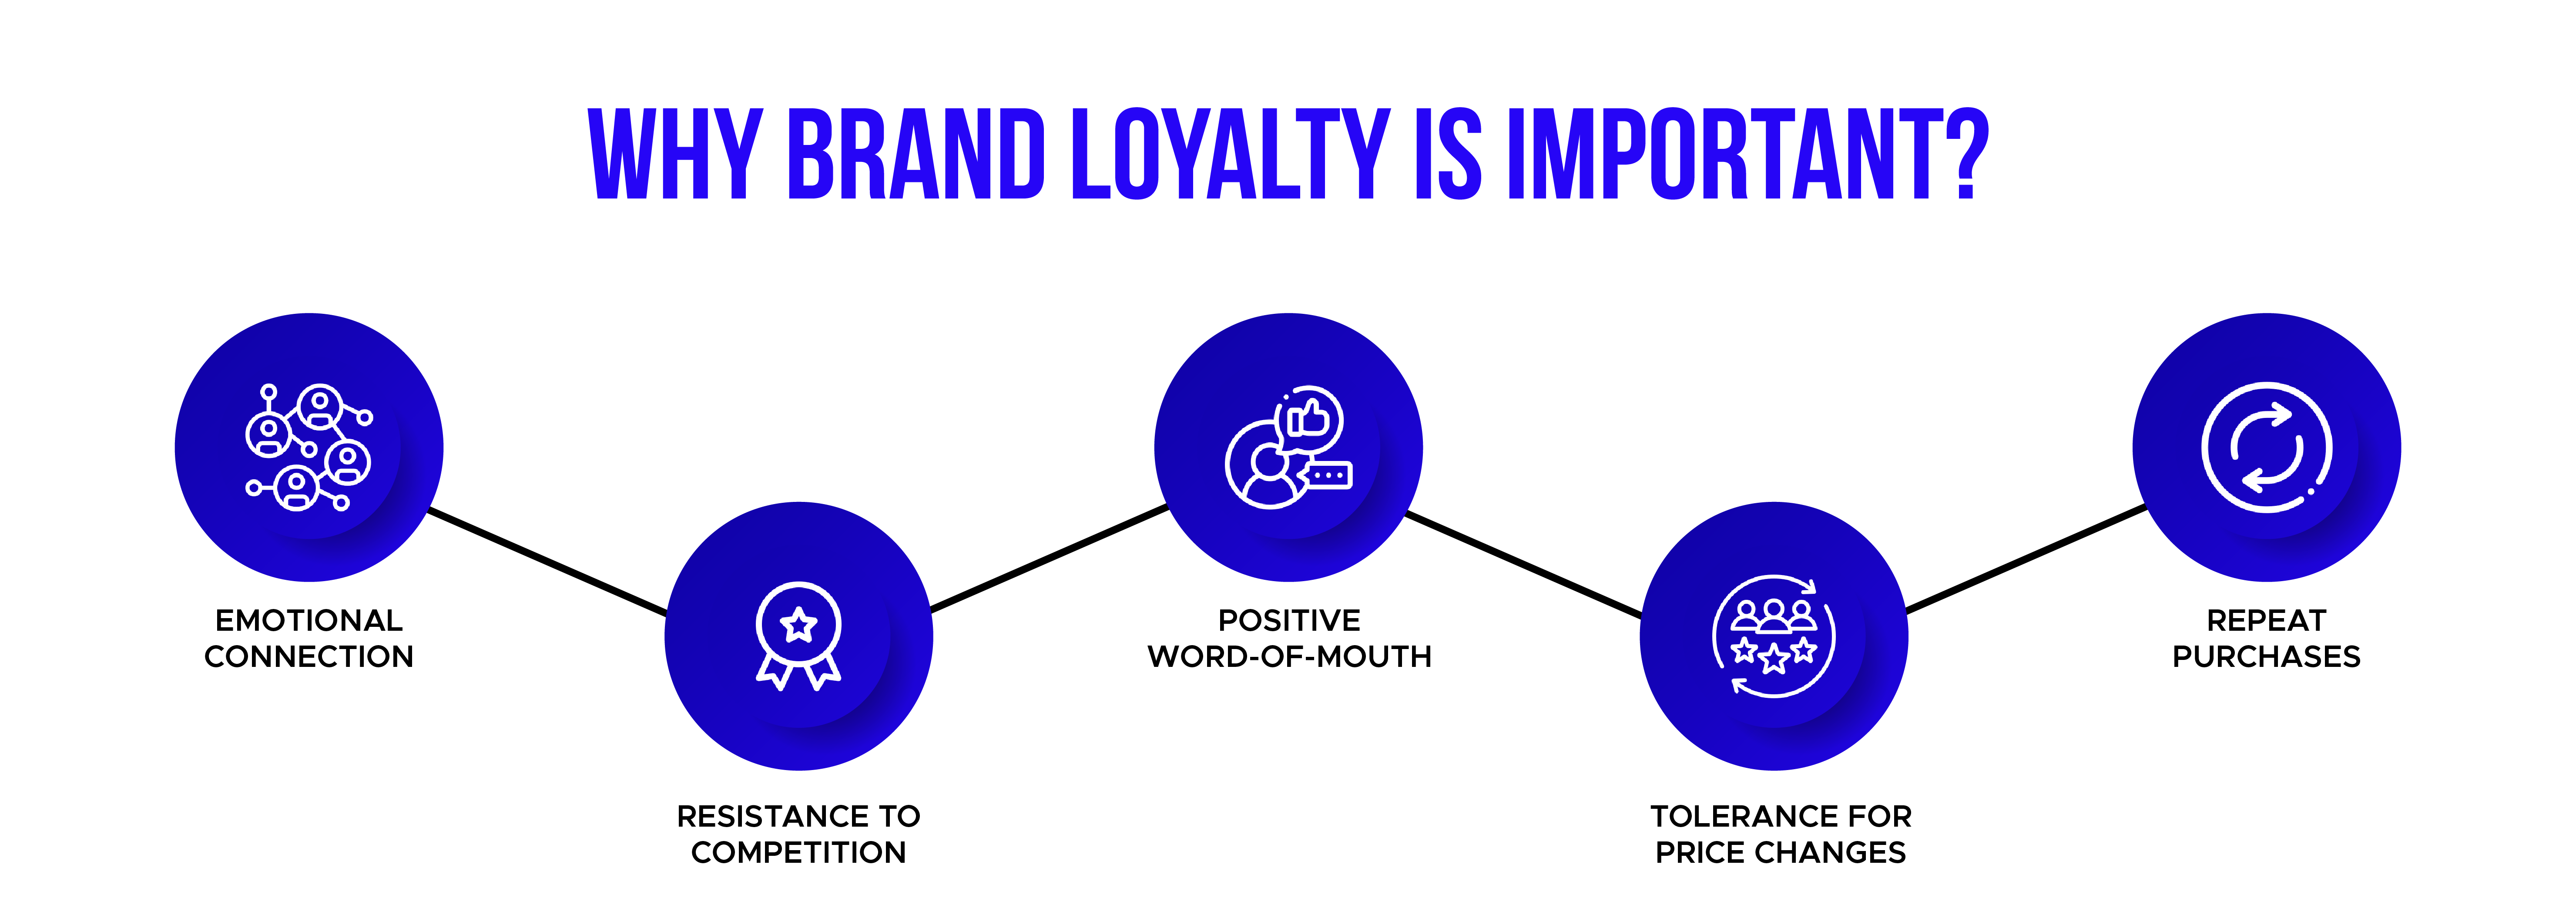 Why Brand Loyalty is Important